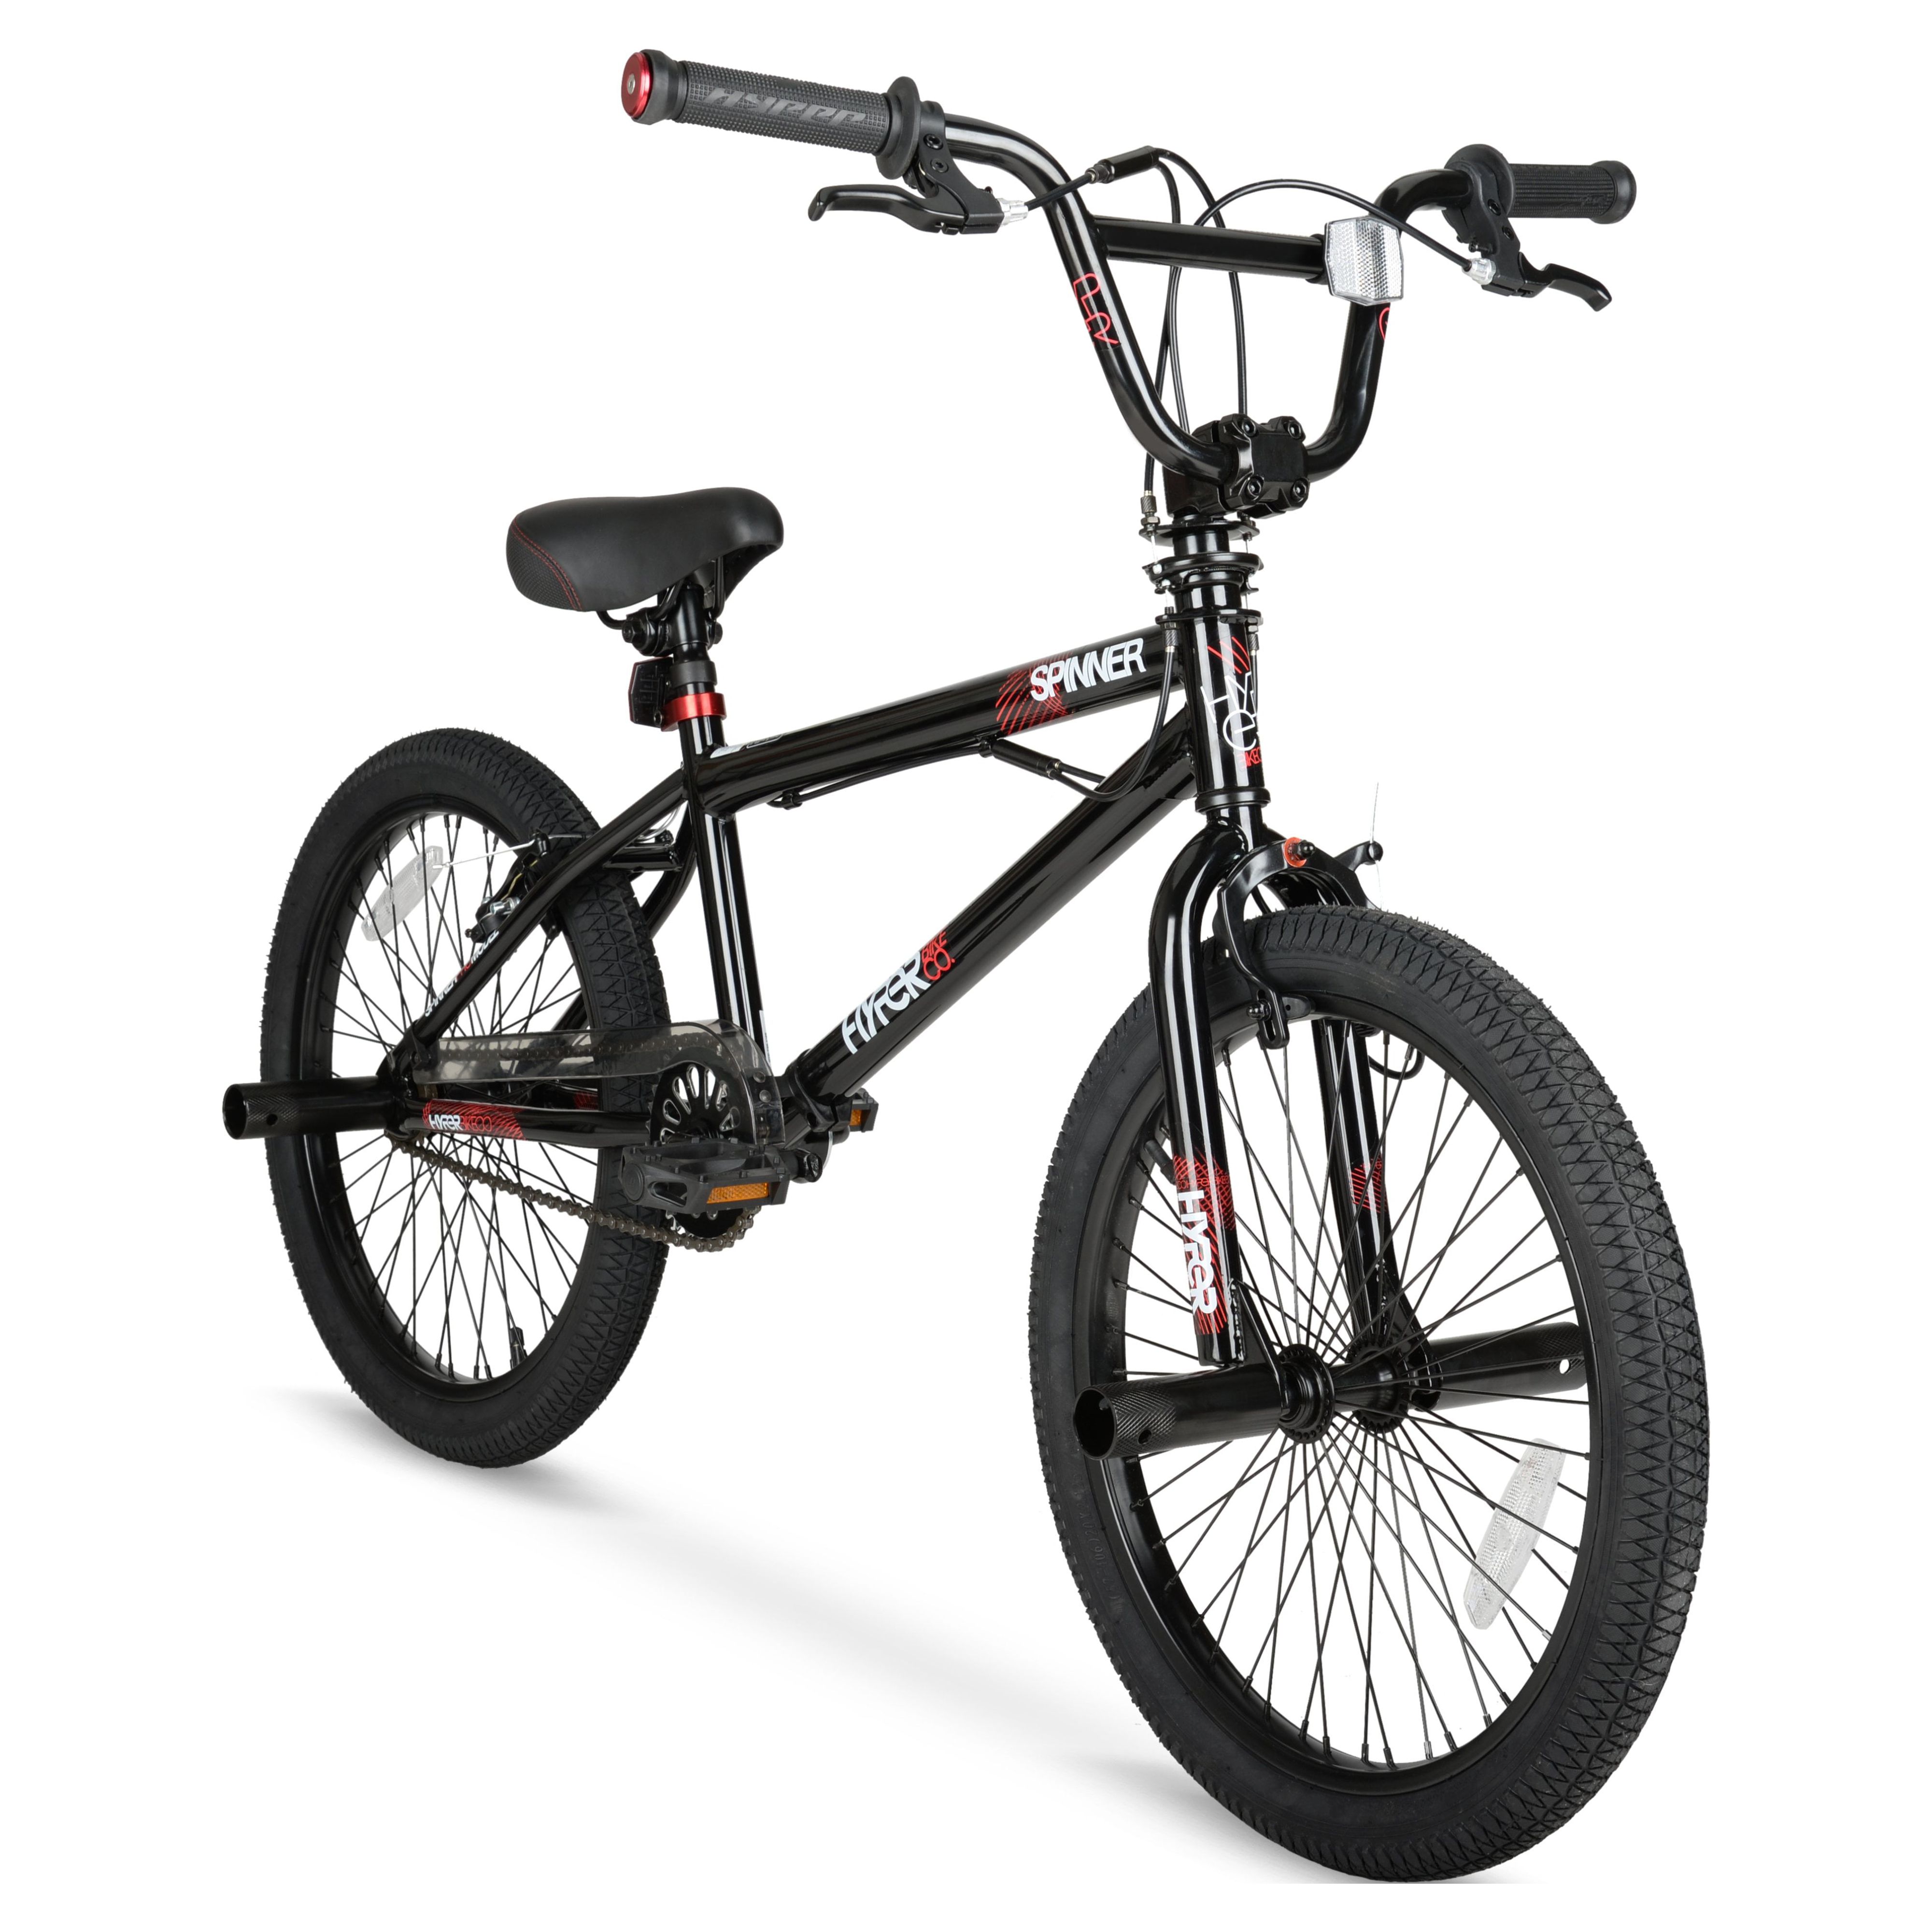 Hyper Bicycles 20" Boy's Spinner BMX Bike for Kids, Black, Recommended Ages Group 8 to 13 Years Old - image 2 of 12